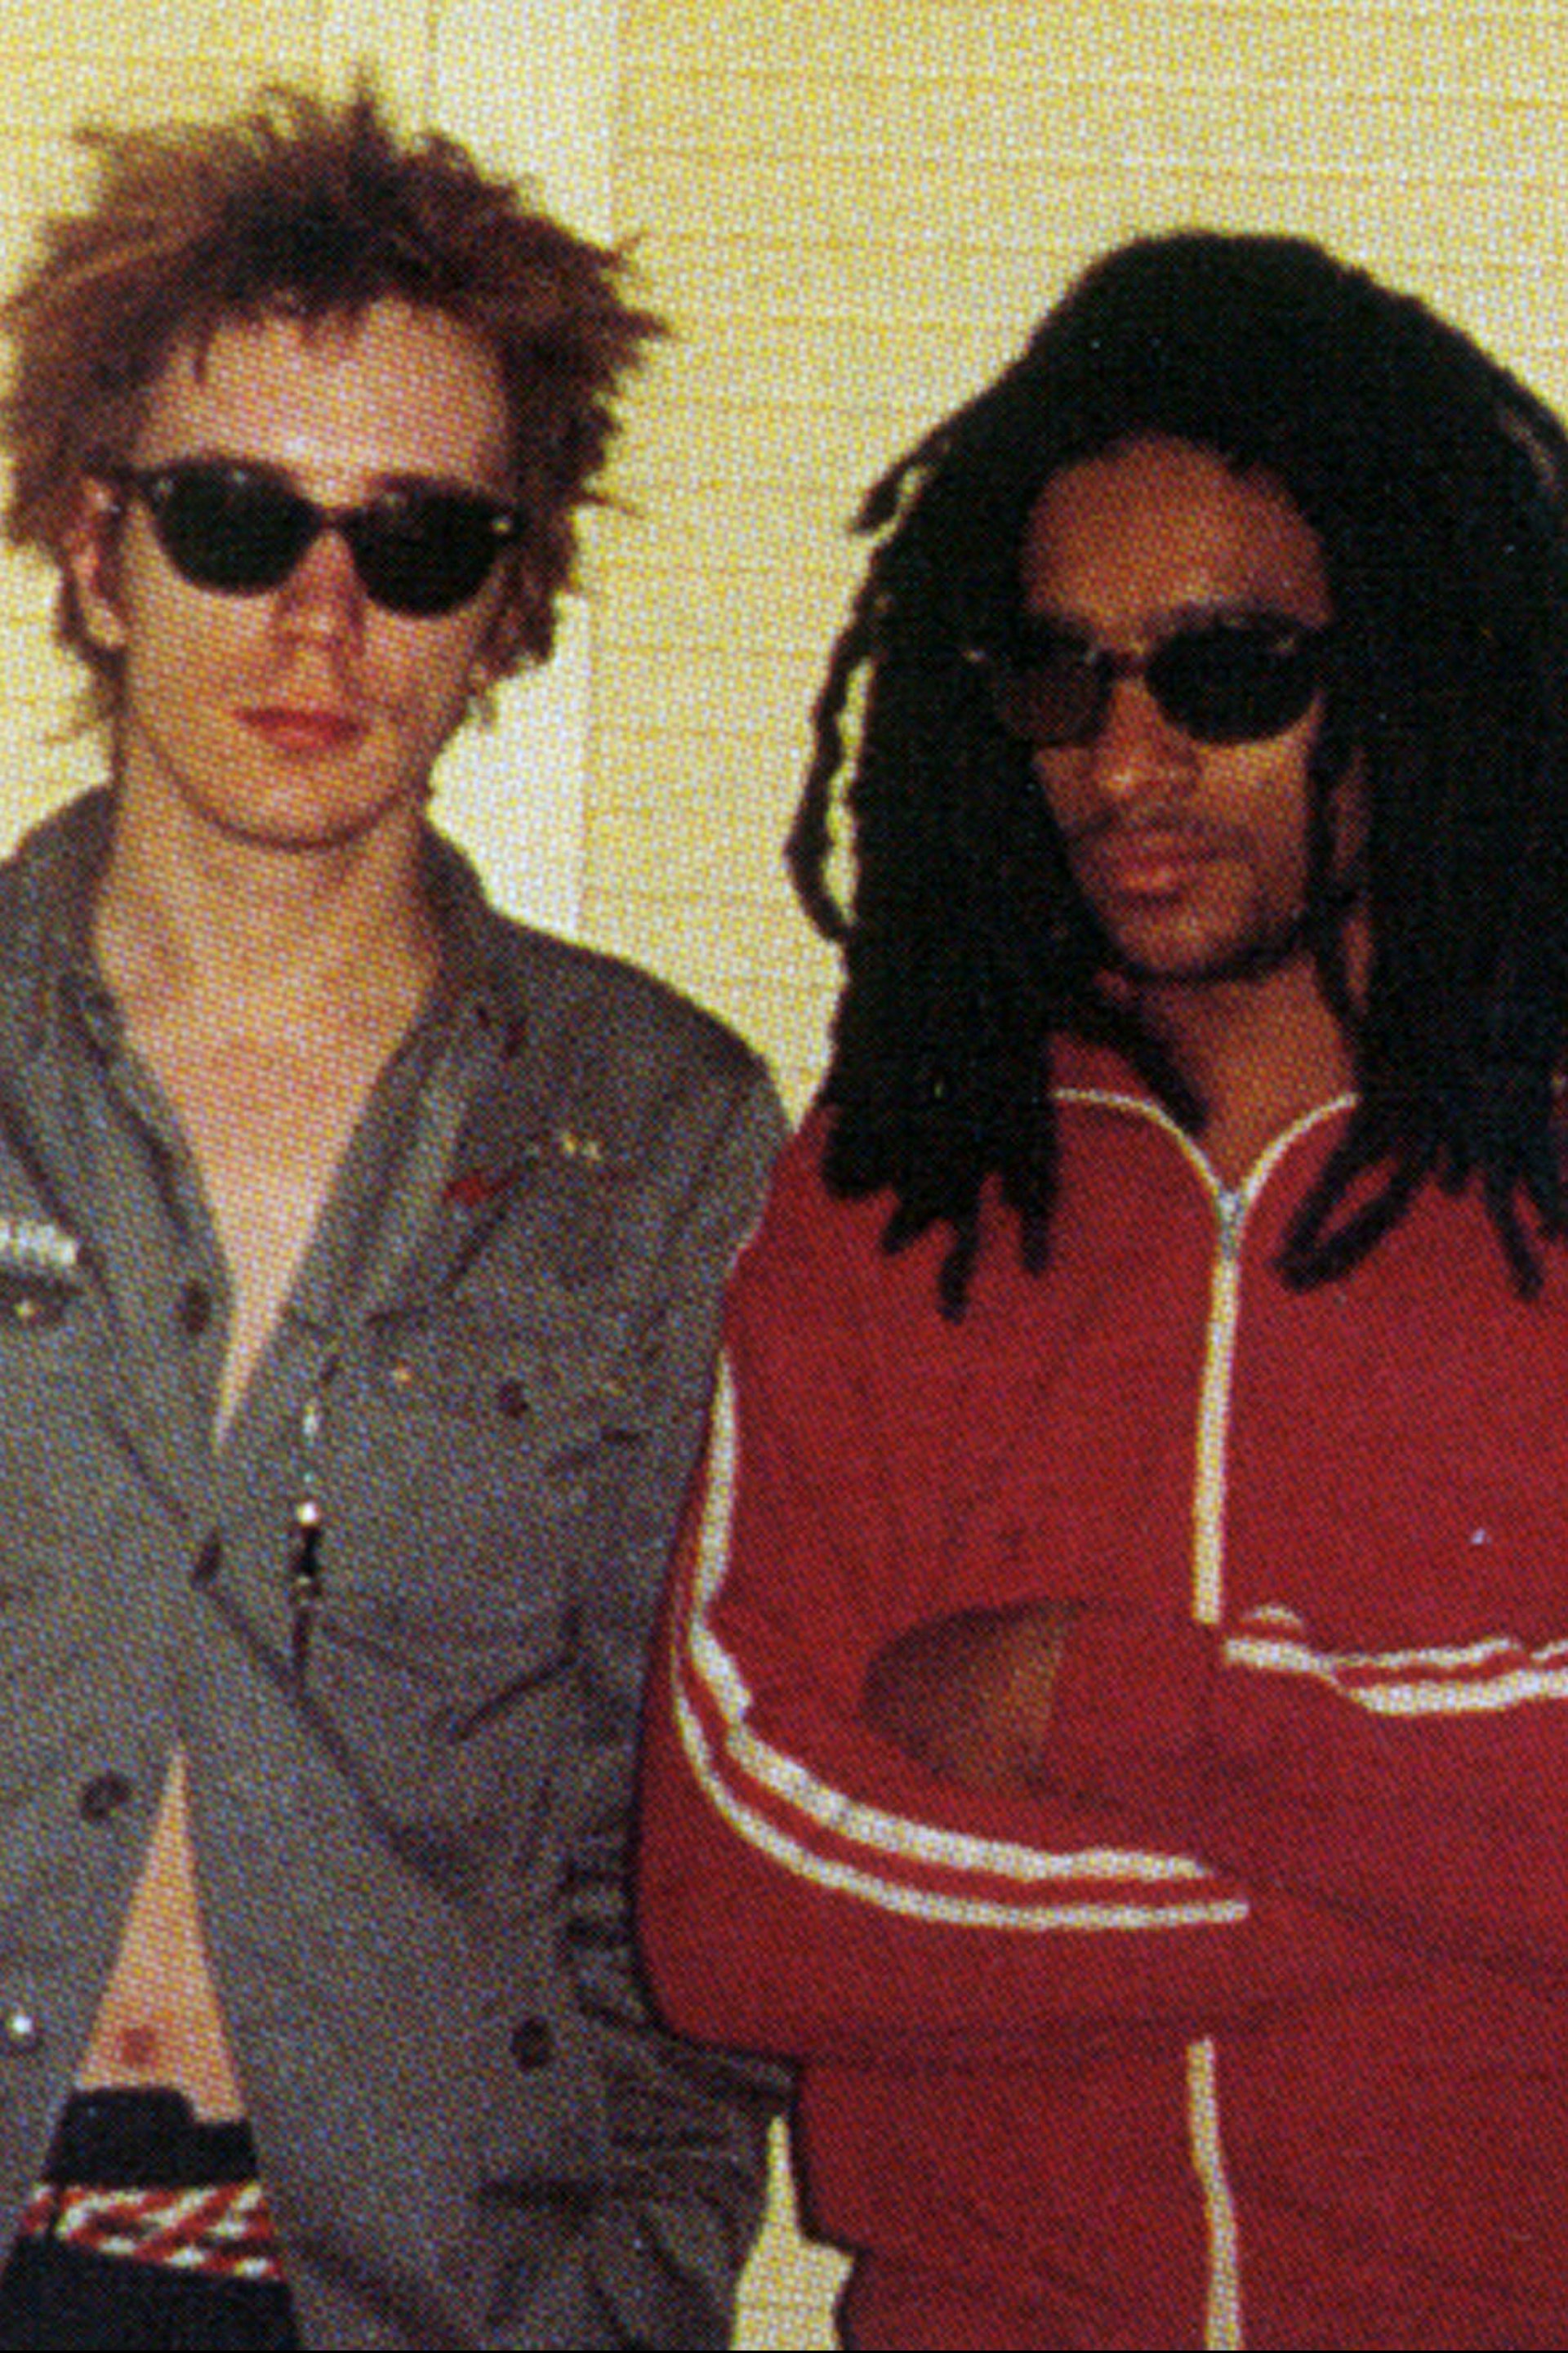 John Lydon and Don Letts.